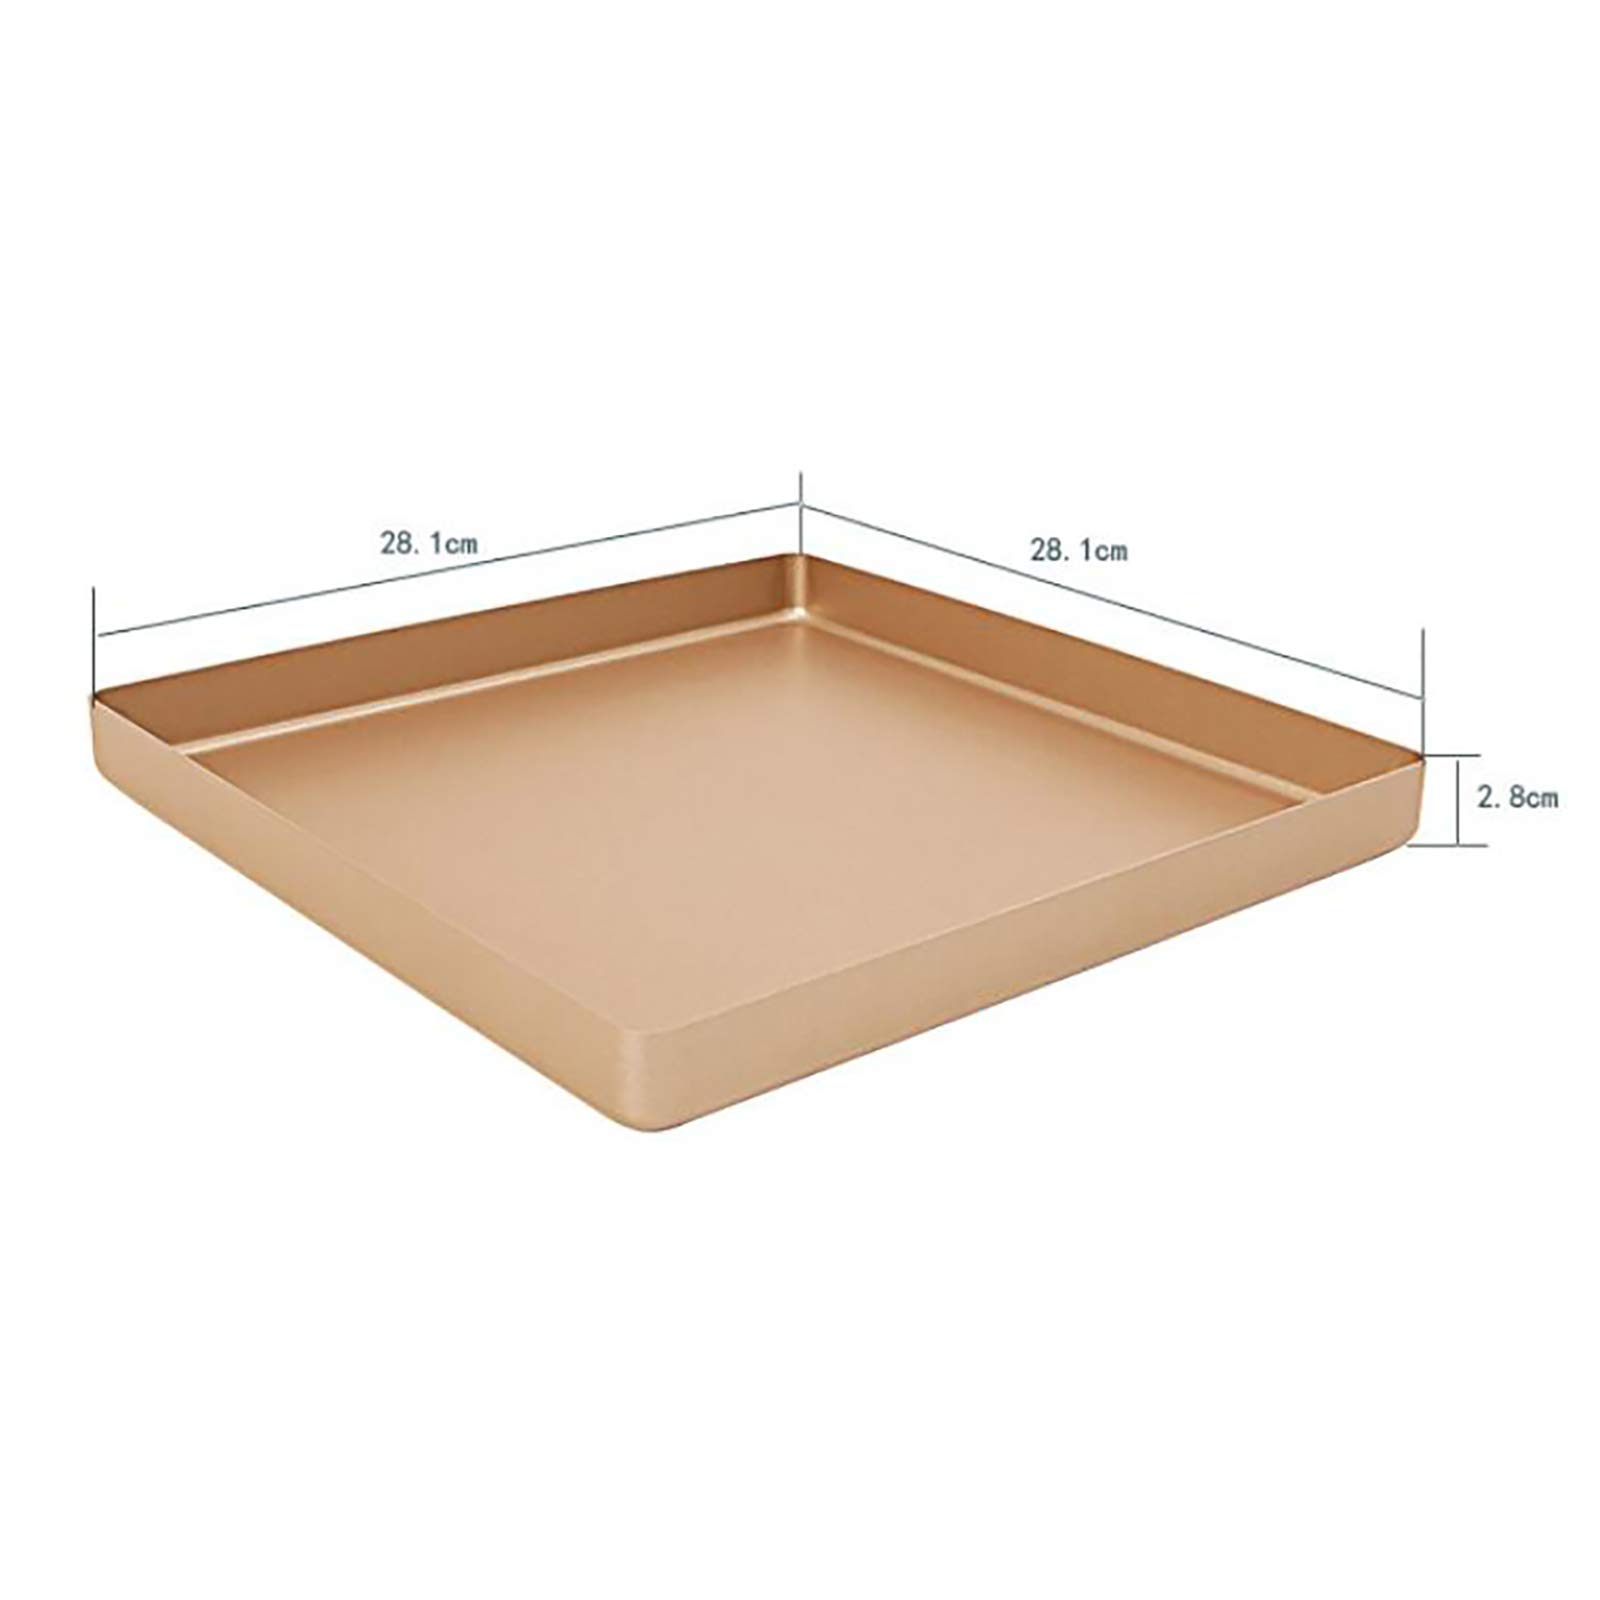 WAYERTY Gold 11 Inch Square Baking Tray Bakeware Pan Aluminum Premium Not-Stick Pastry Tools Oven Tray Kitchen Accessory Baking Dish